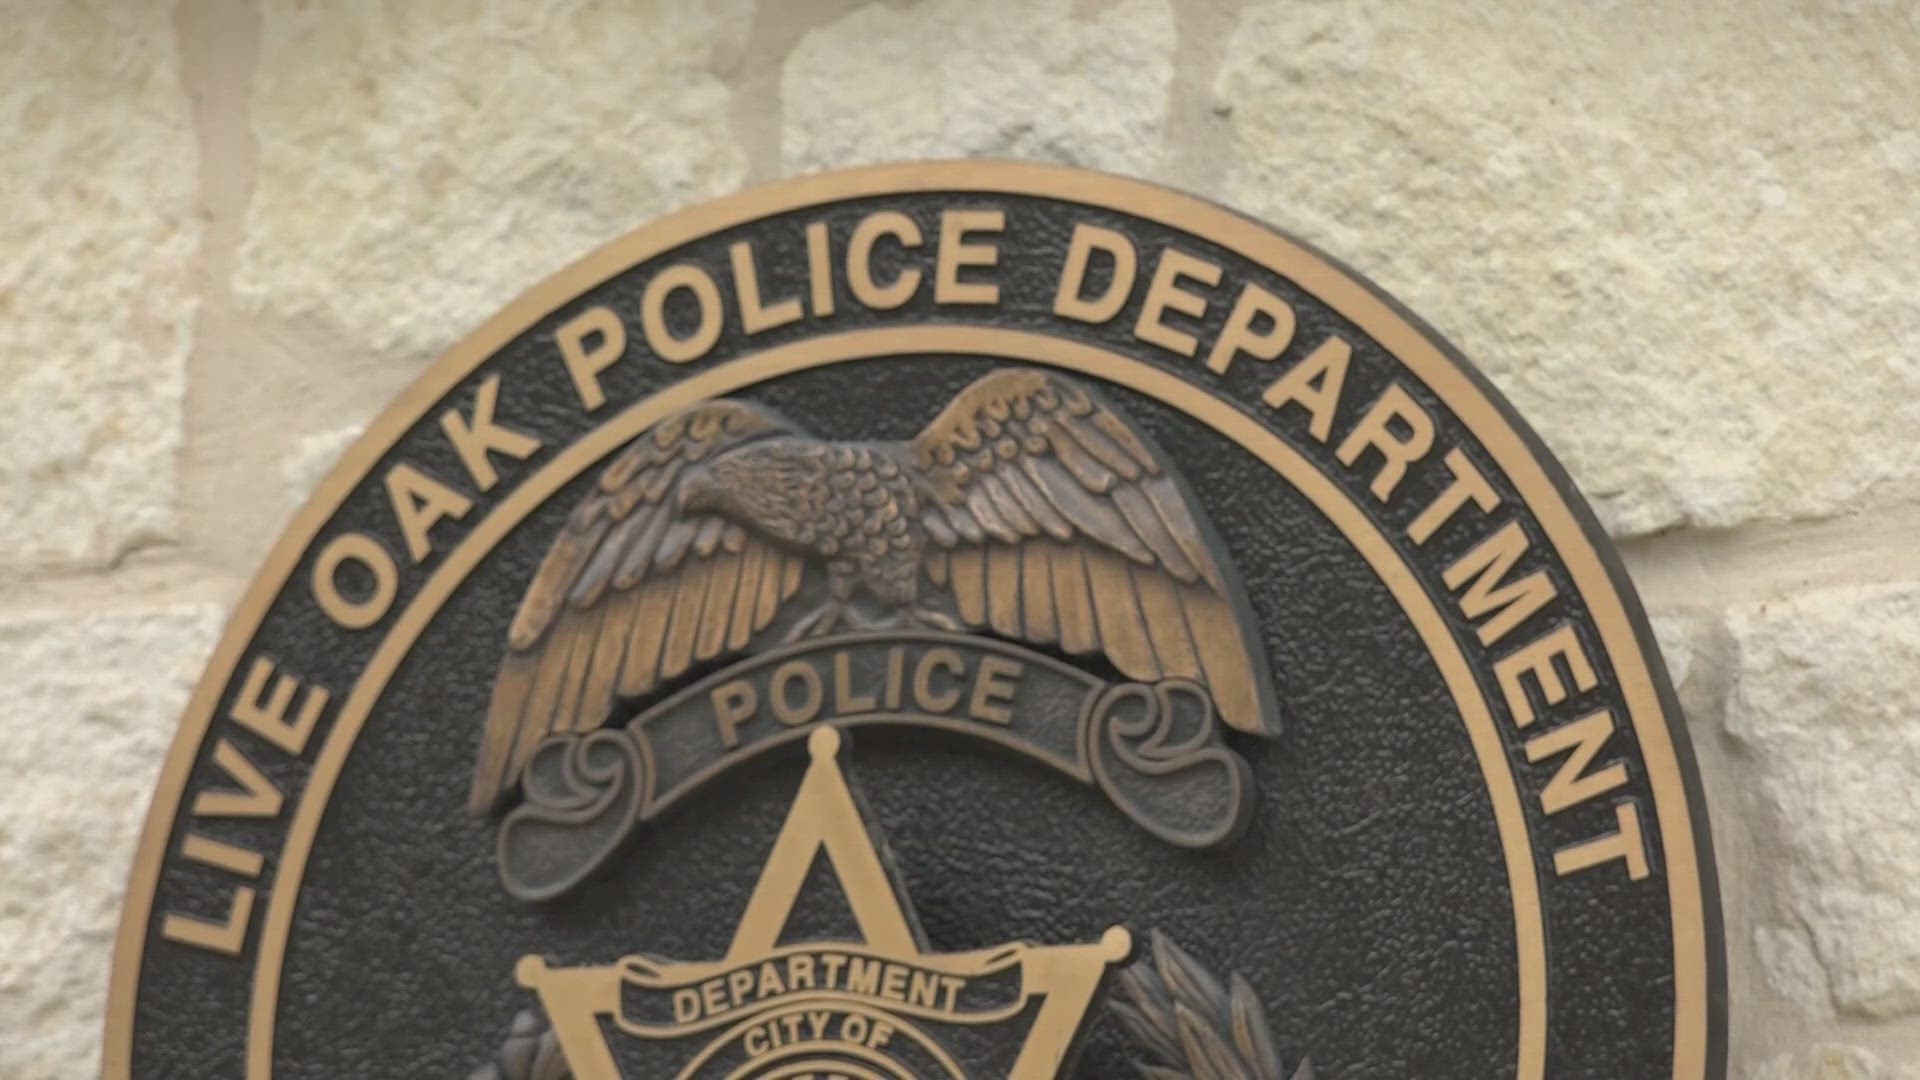 San Antonio-area detectives learned the child was assaulted by multiple people over time.